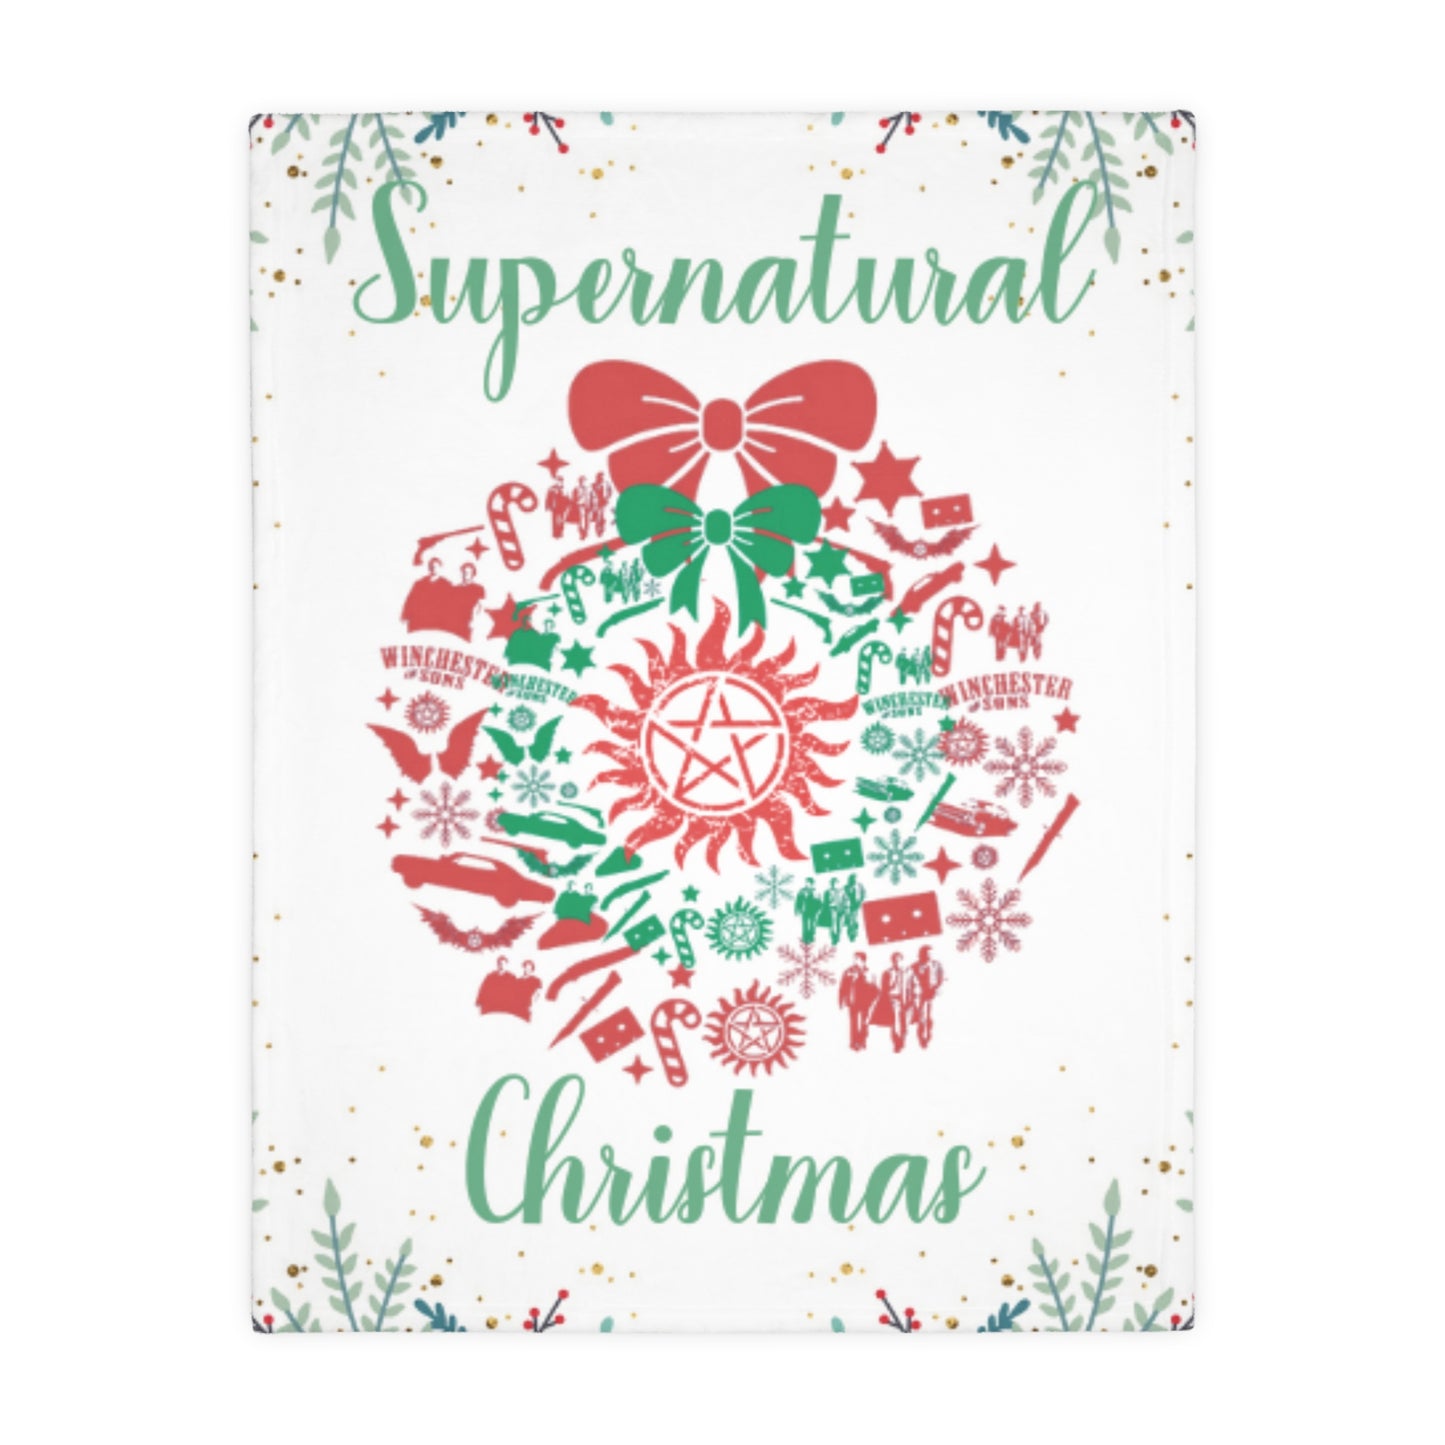 Supernatural Christmas (Two-sided print)